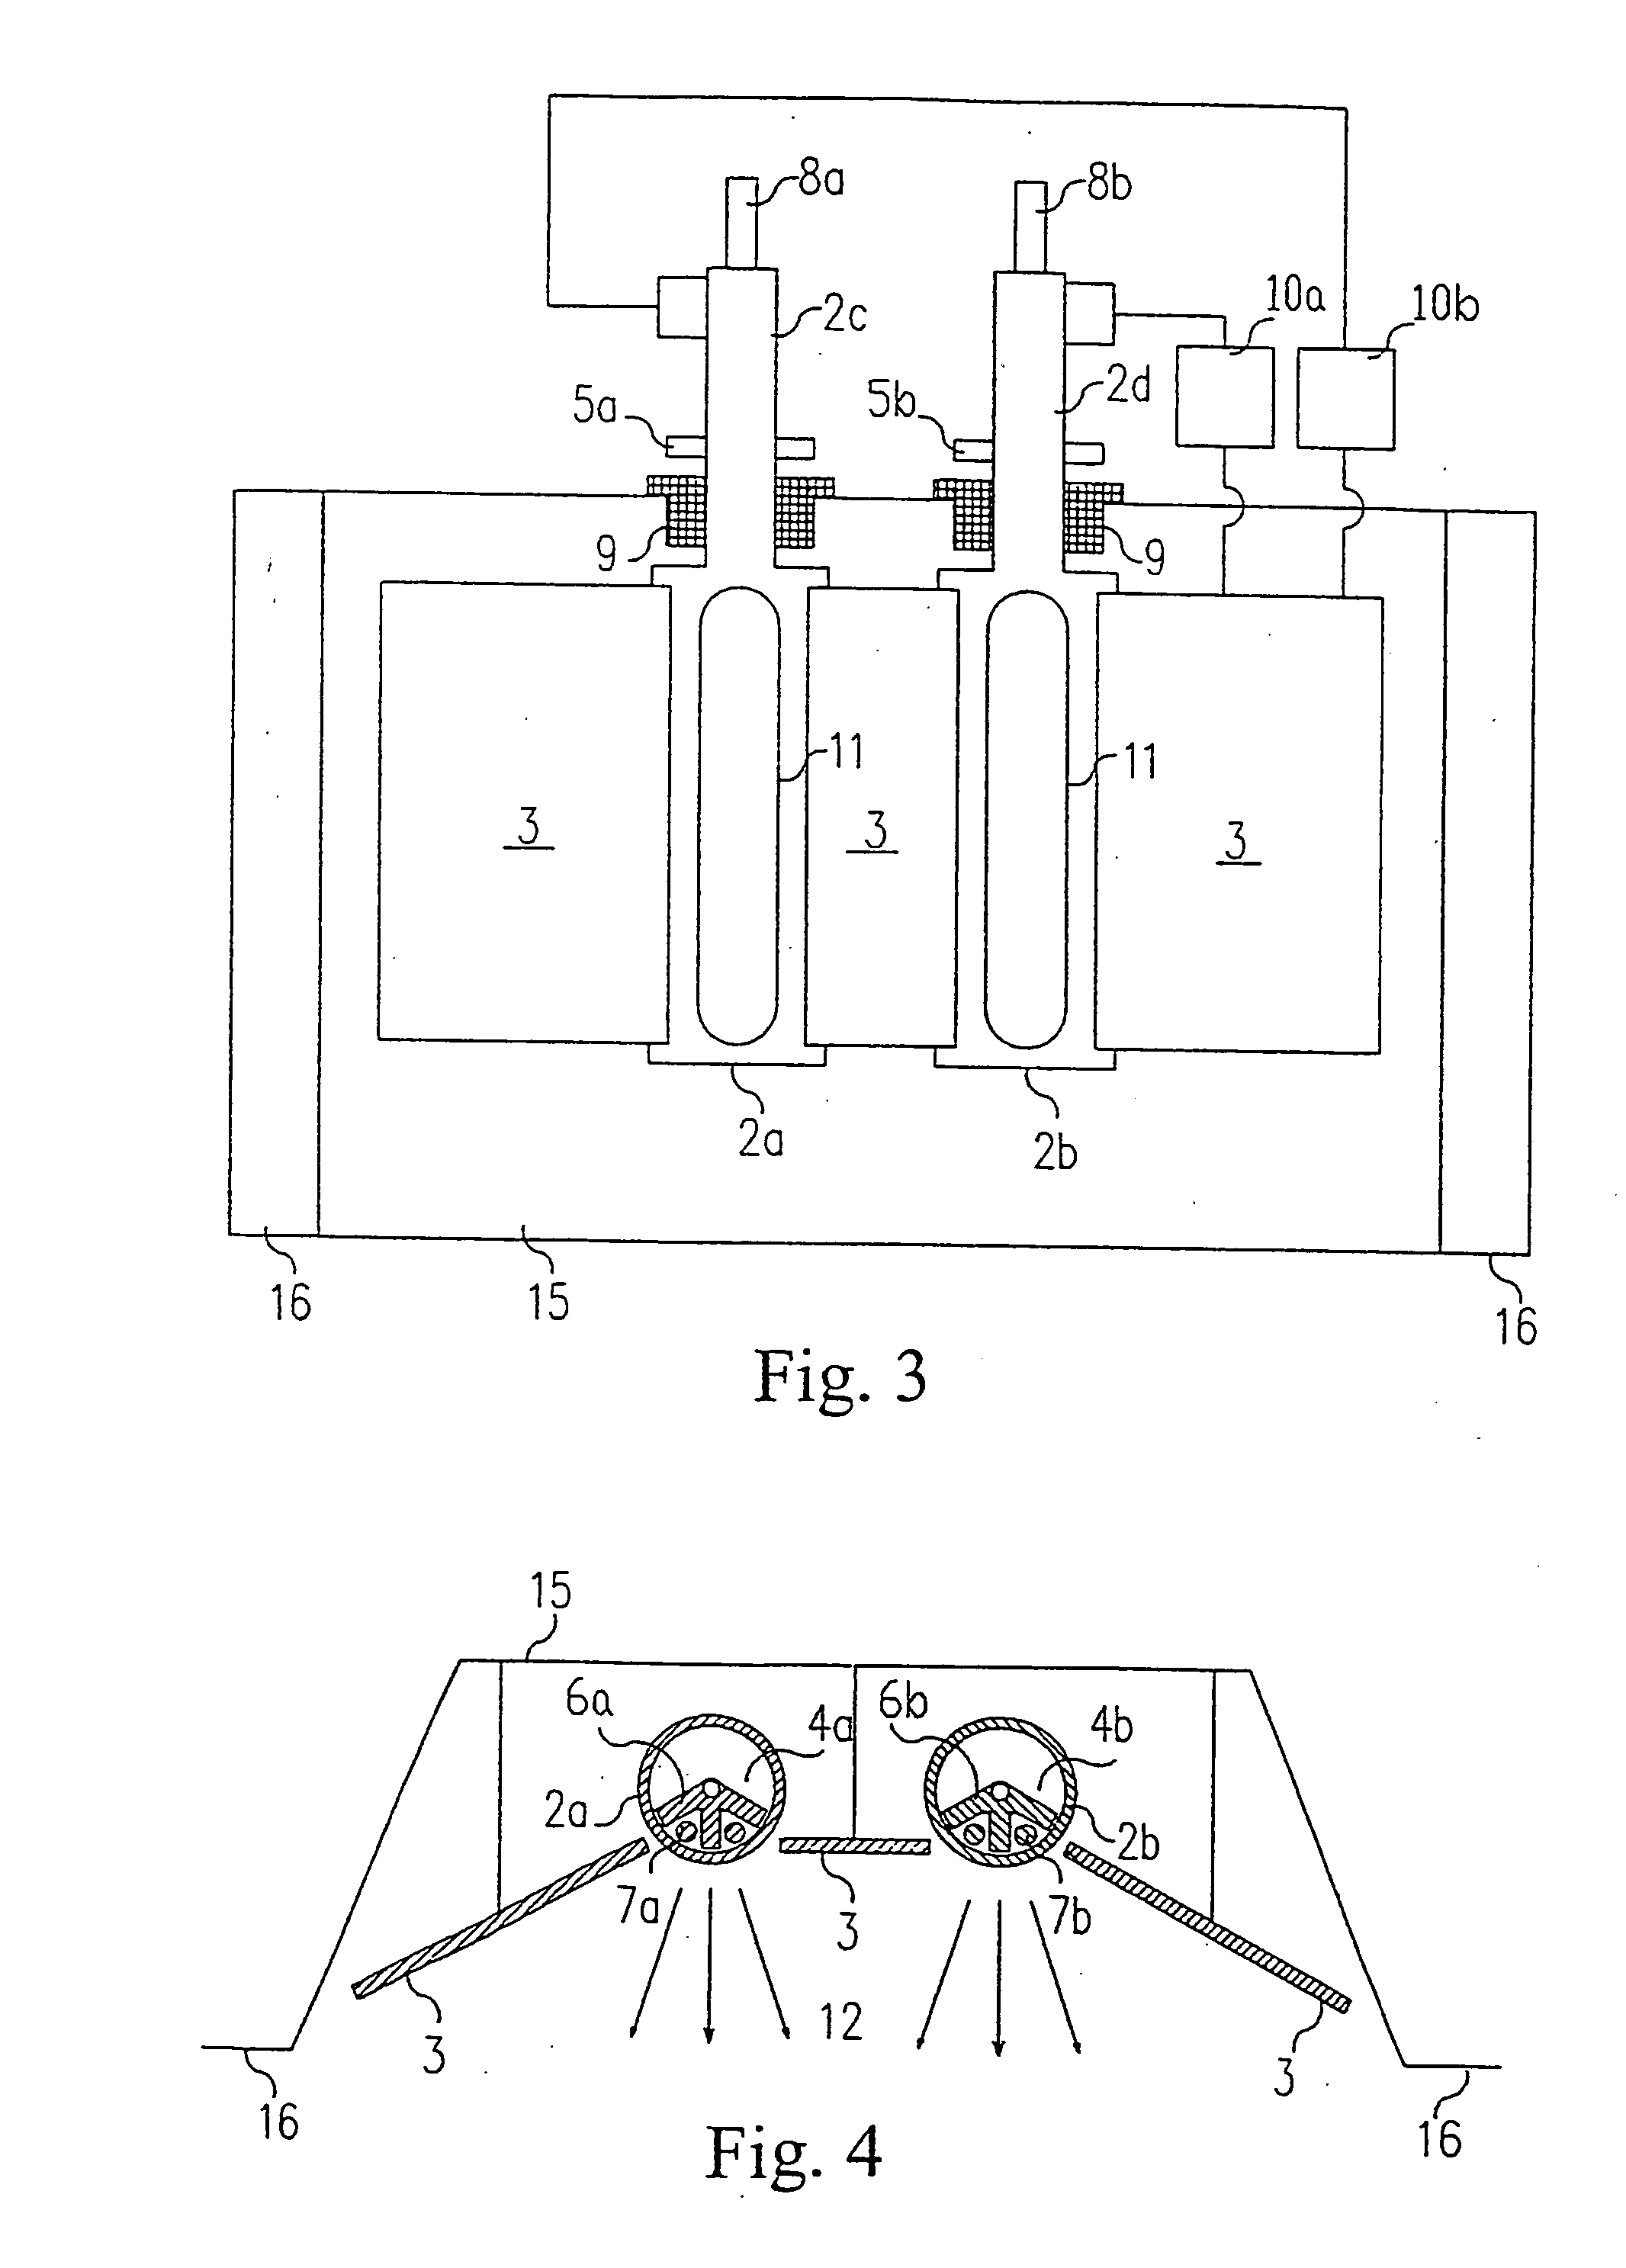 Apparatus for evaporation of materials for coating of objects